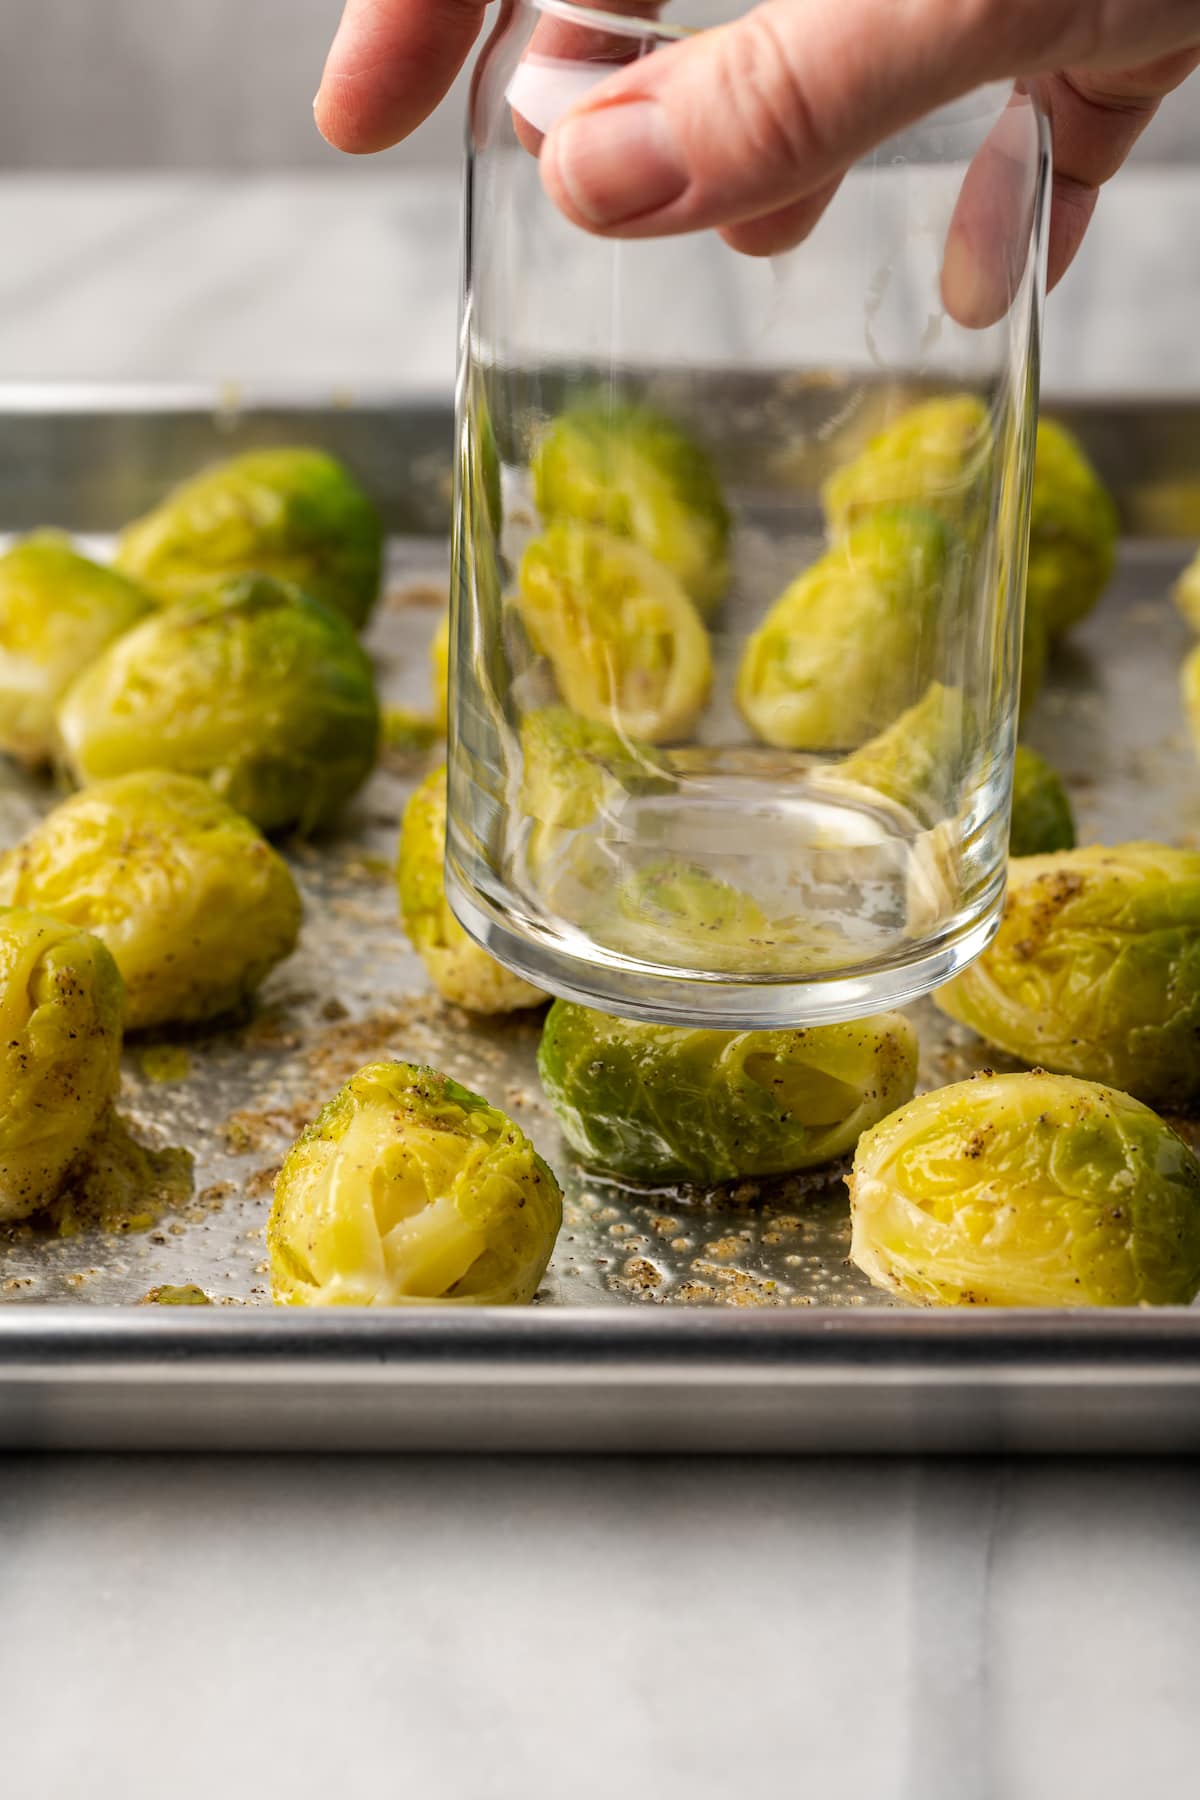 Using the bottom of a glass to smash a Brussels sprout on a sheet pan